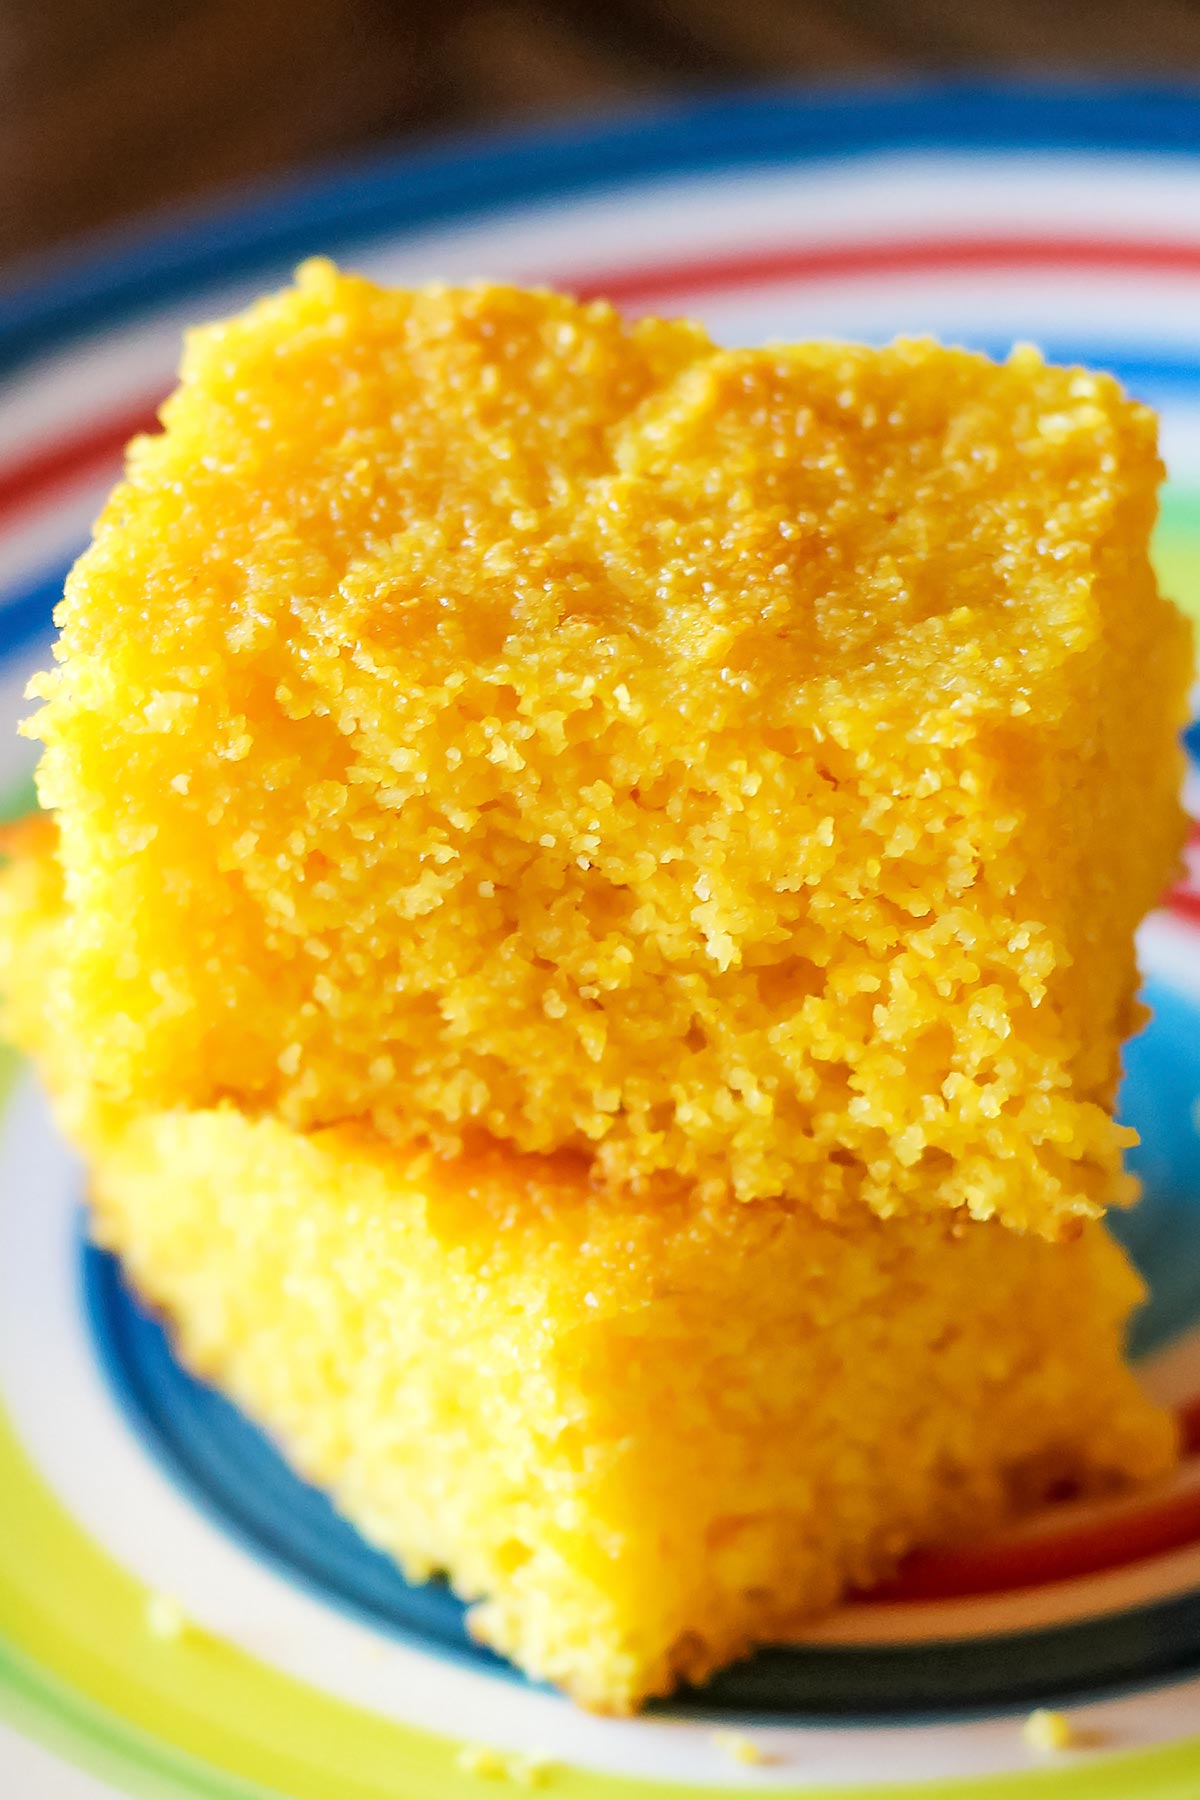 Stack of two pieces of gluten free cornbread